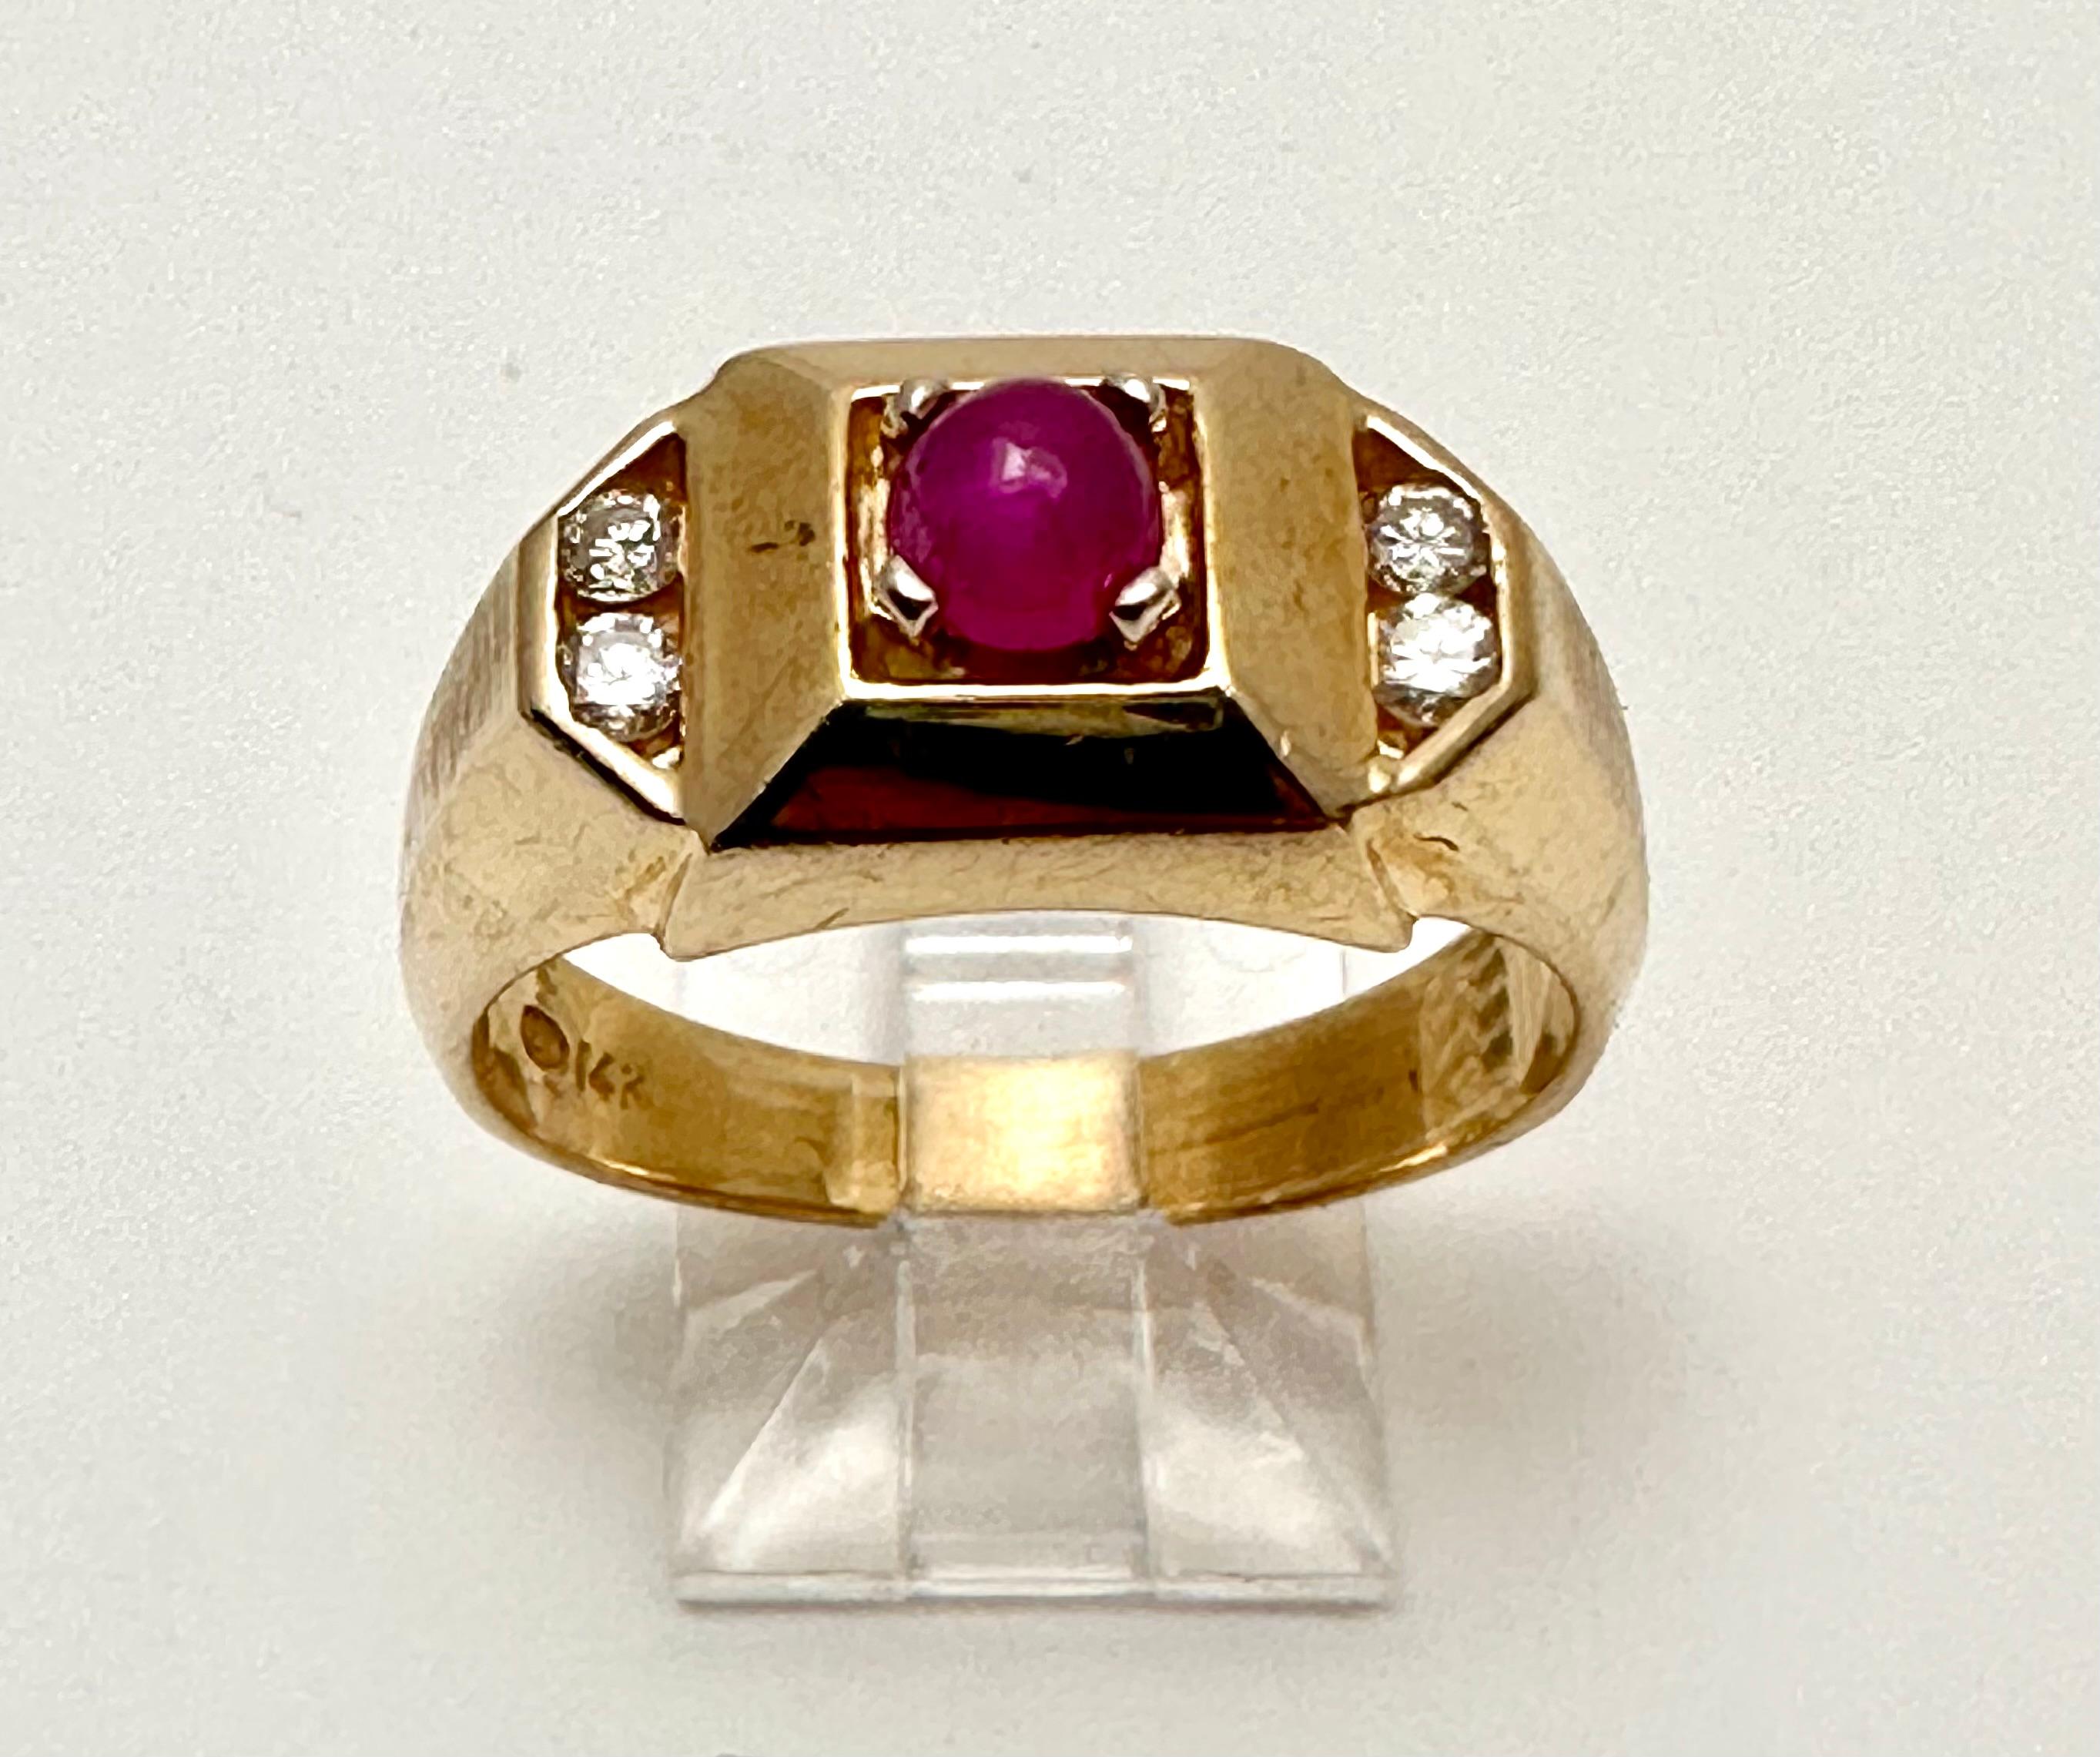 Modern 14k Yellow Gold 5mm Cabochon Ruby with 4 Round Diamonds Ring Size 9 1/2 For Sale